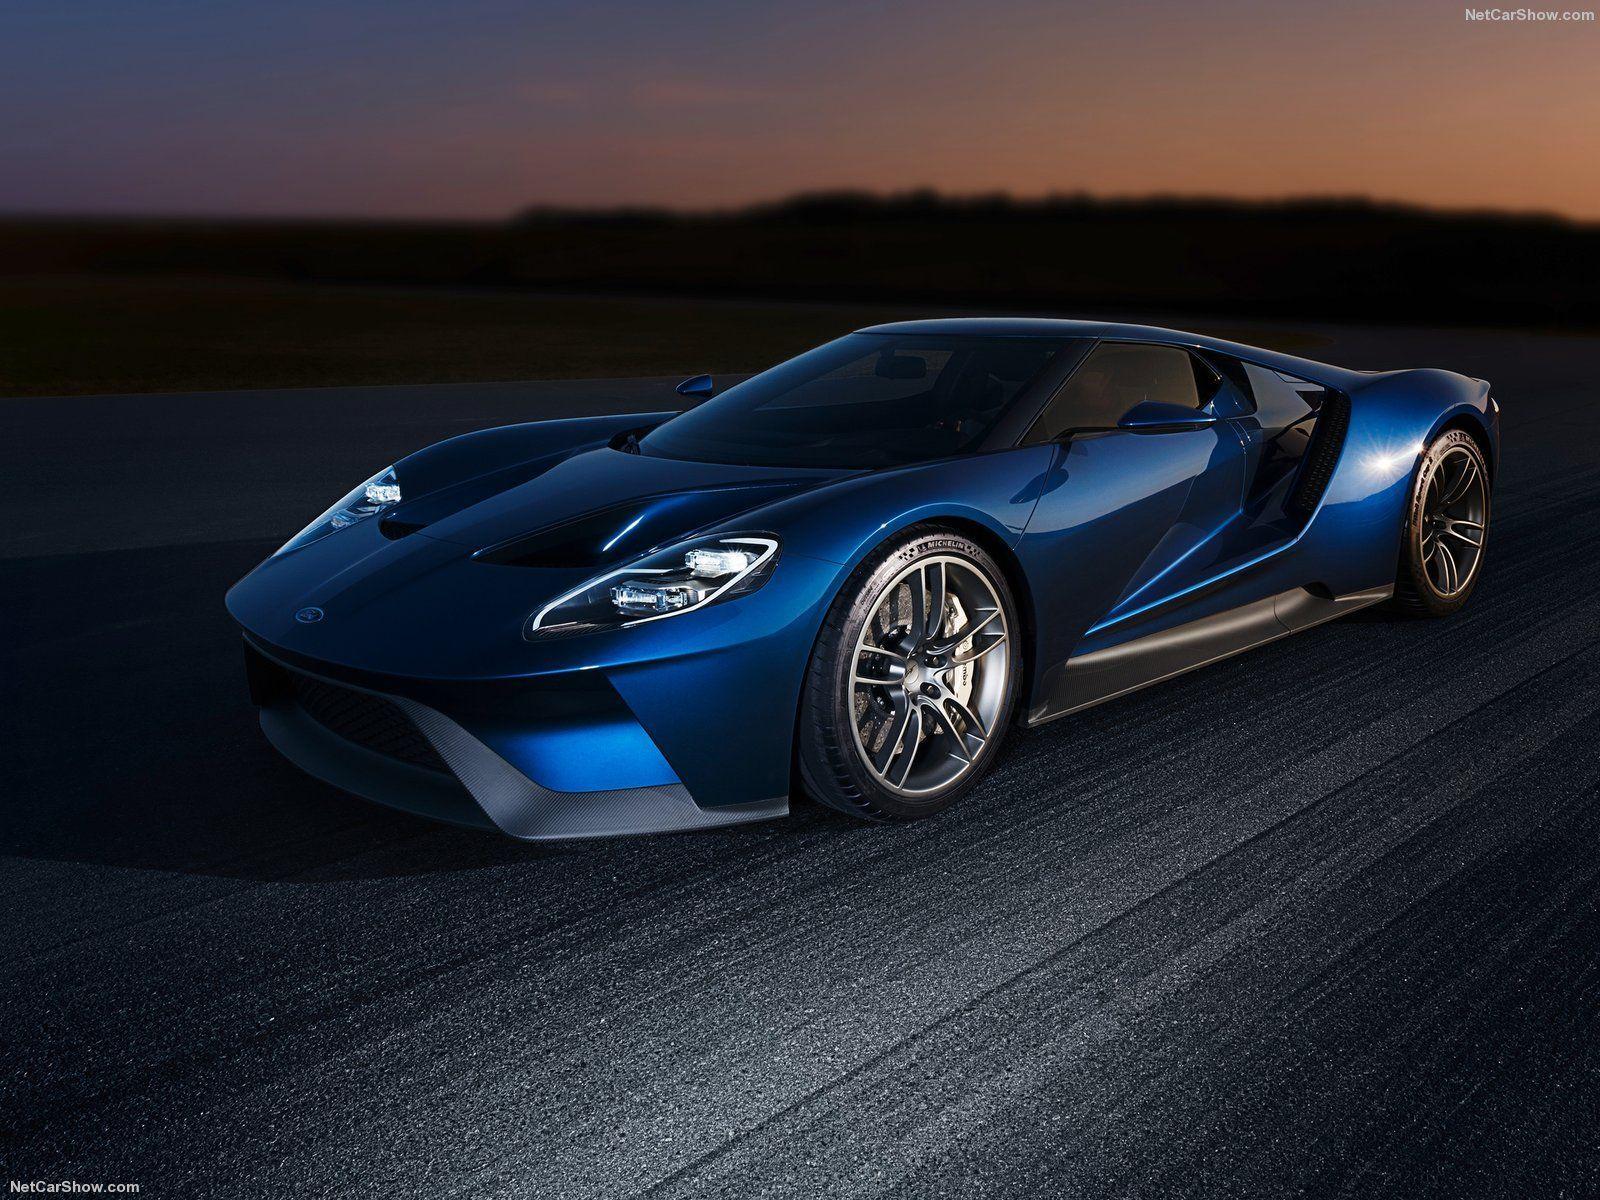 Ford GT Concept photo with 49 pics. CarsBase.com